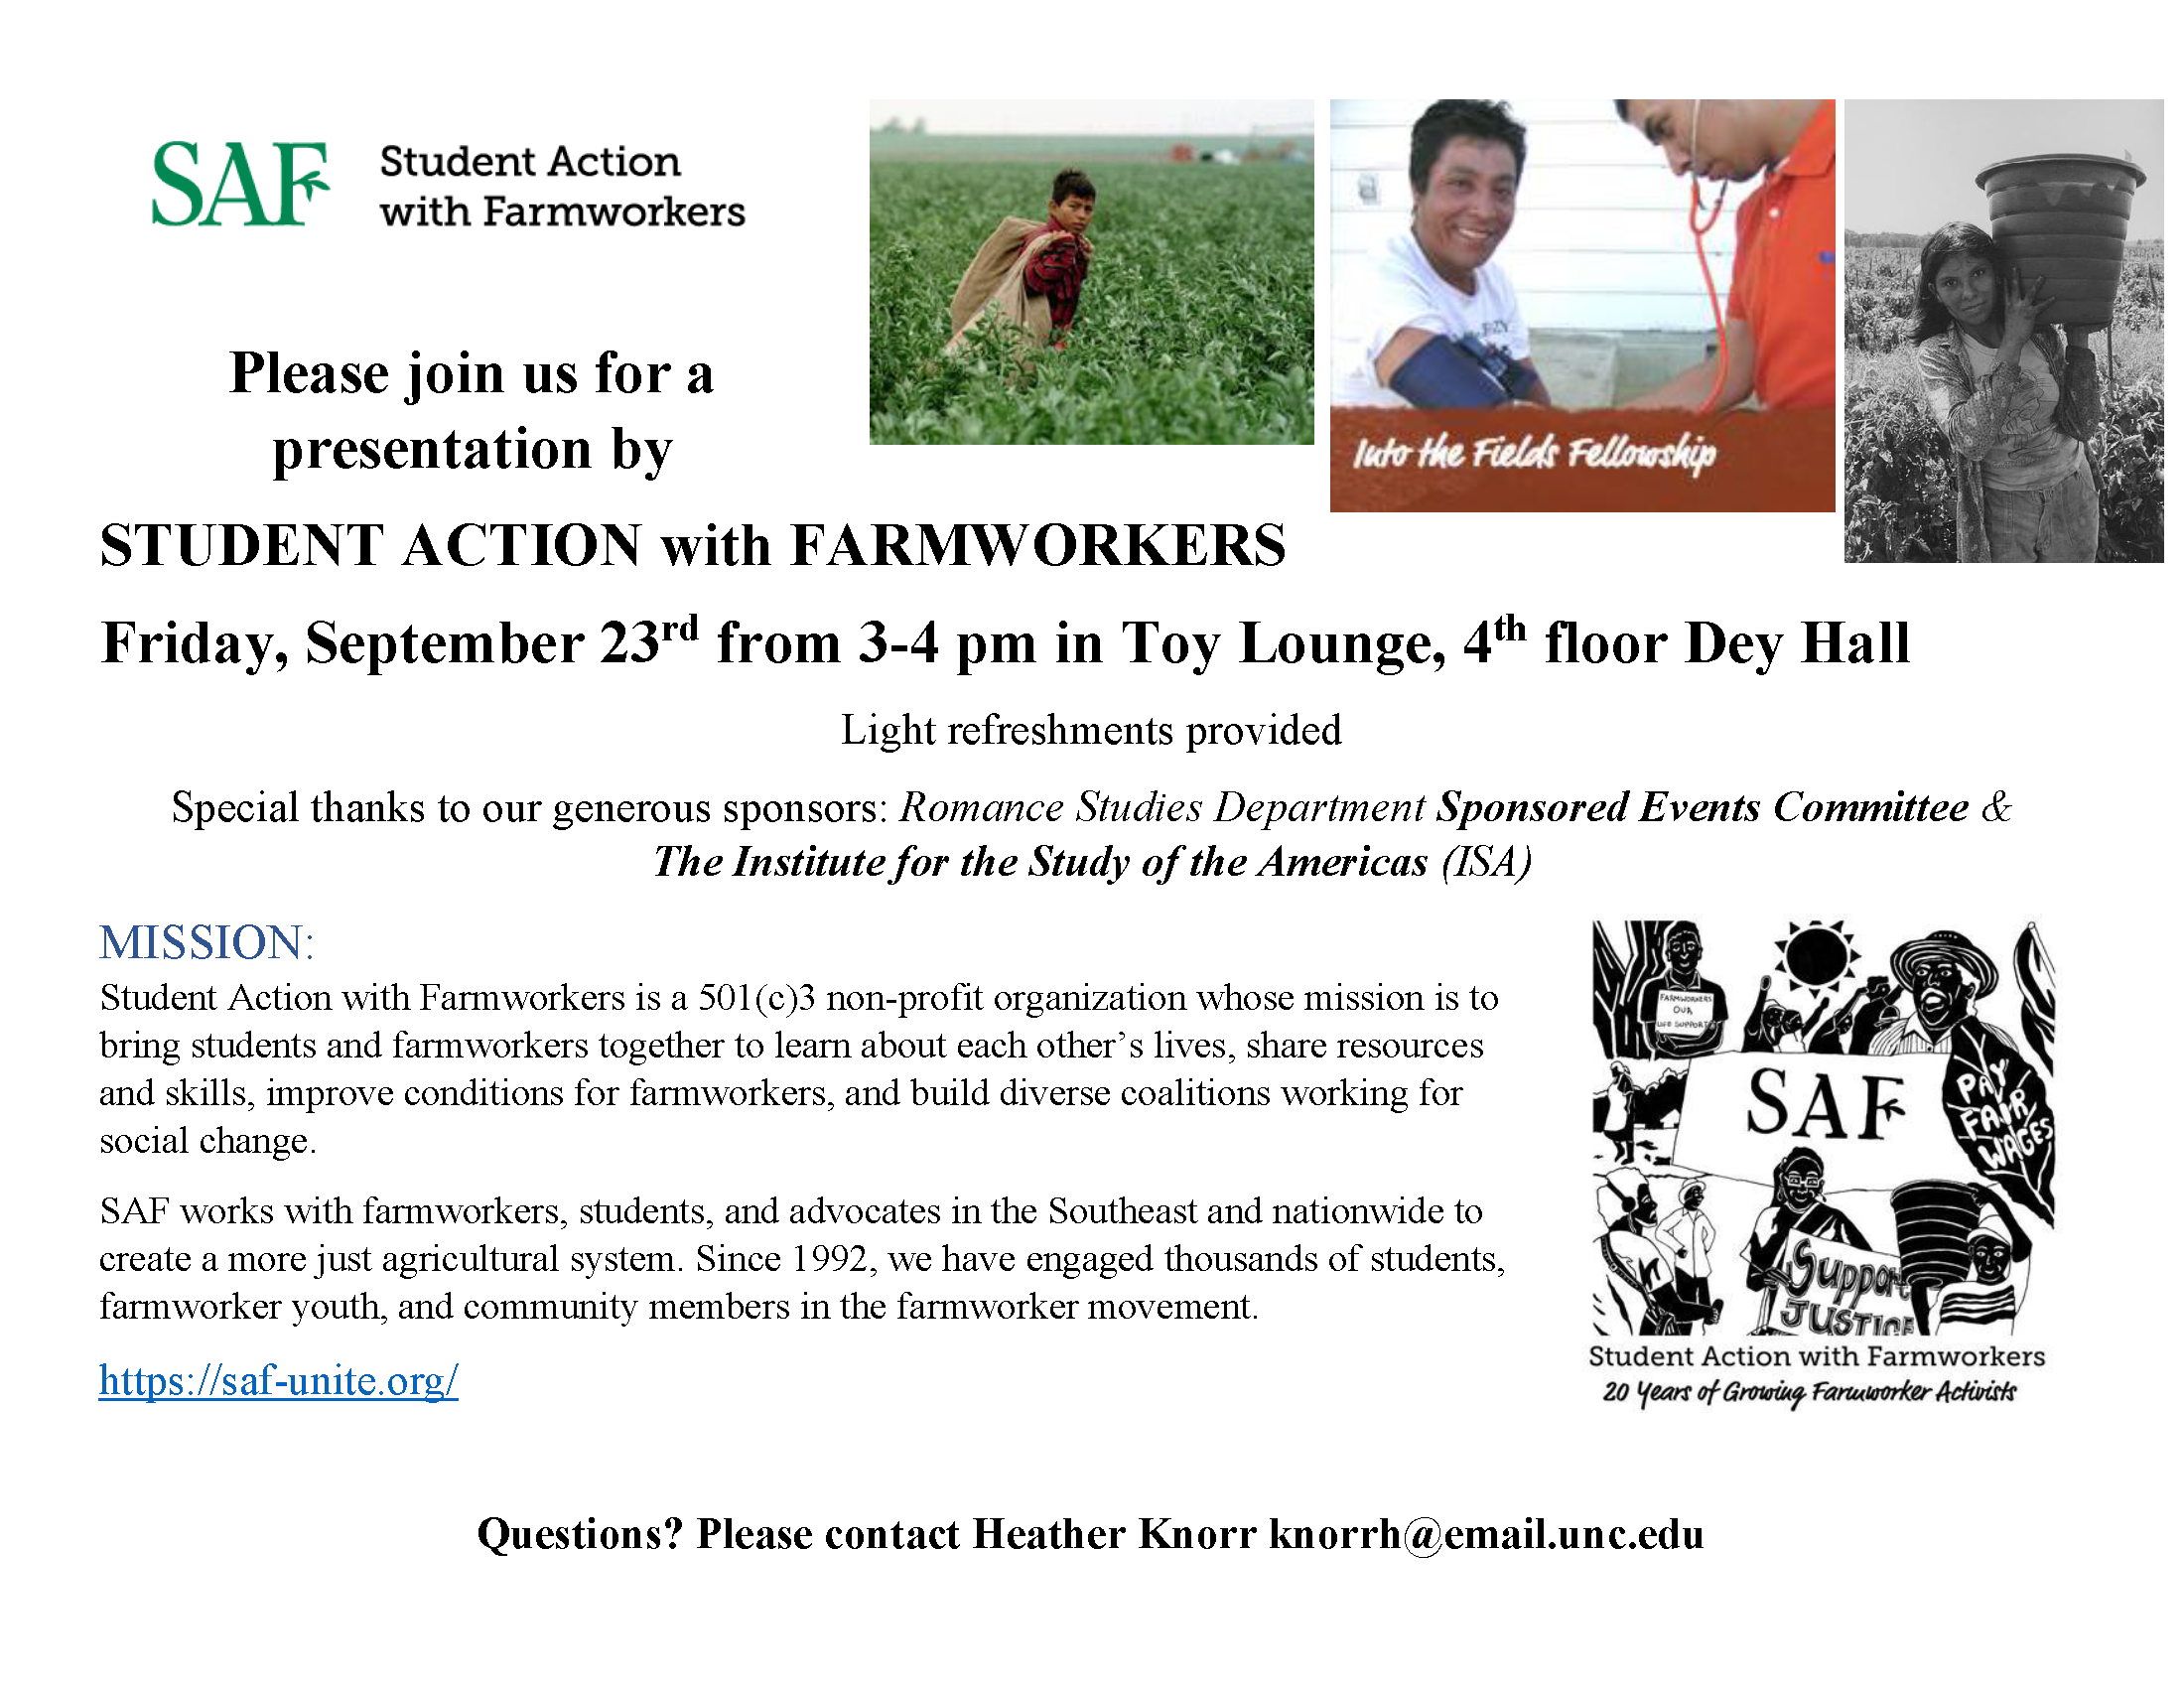 Student Action with Farmworkers Presentation